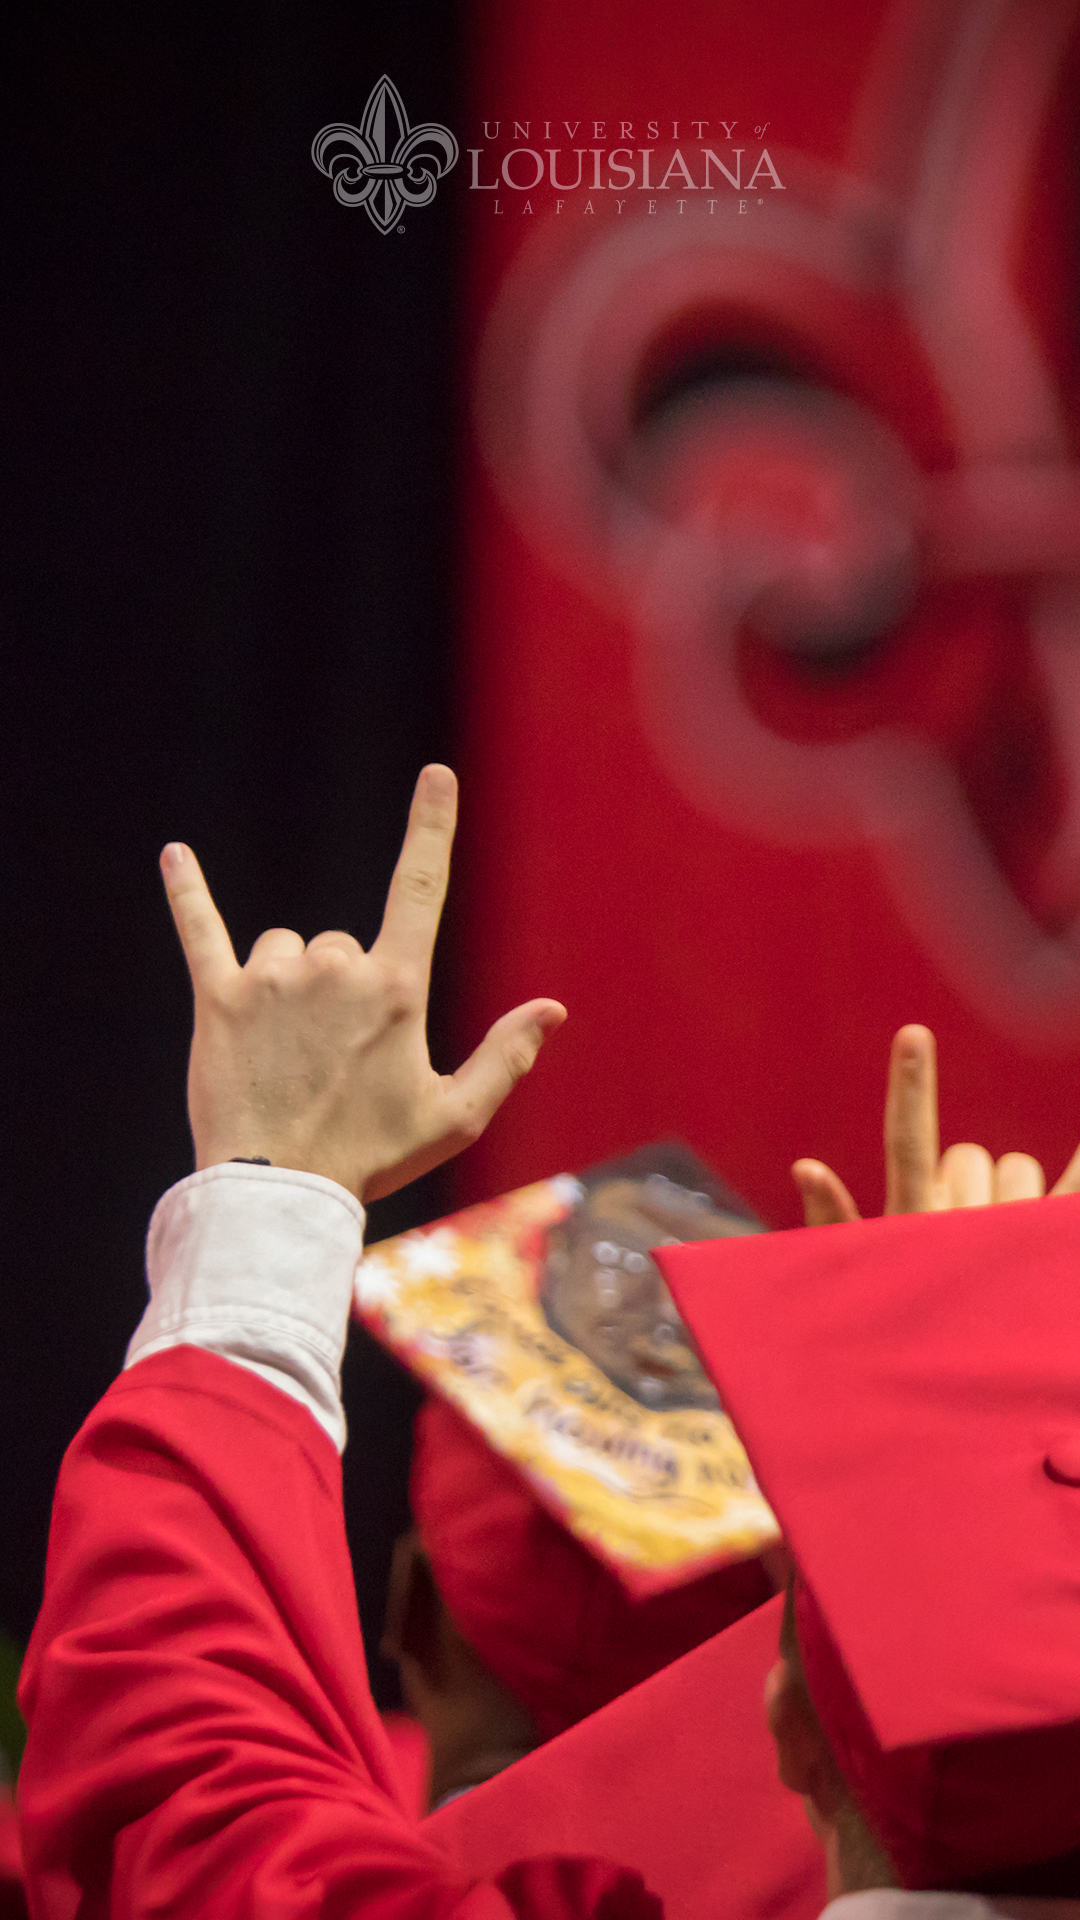 Photo of a caucasian UL Lafayette graduate from behind with his hand raised in the UL hand sign.